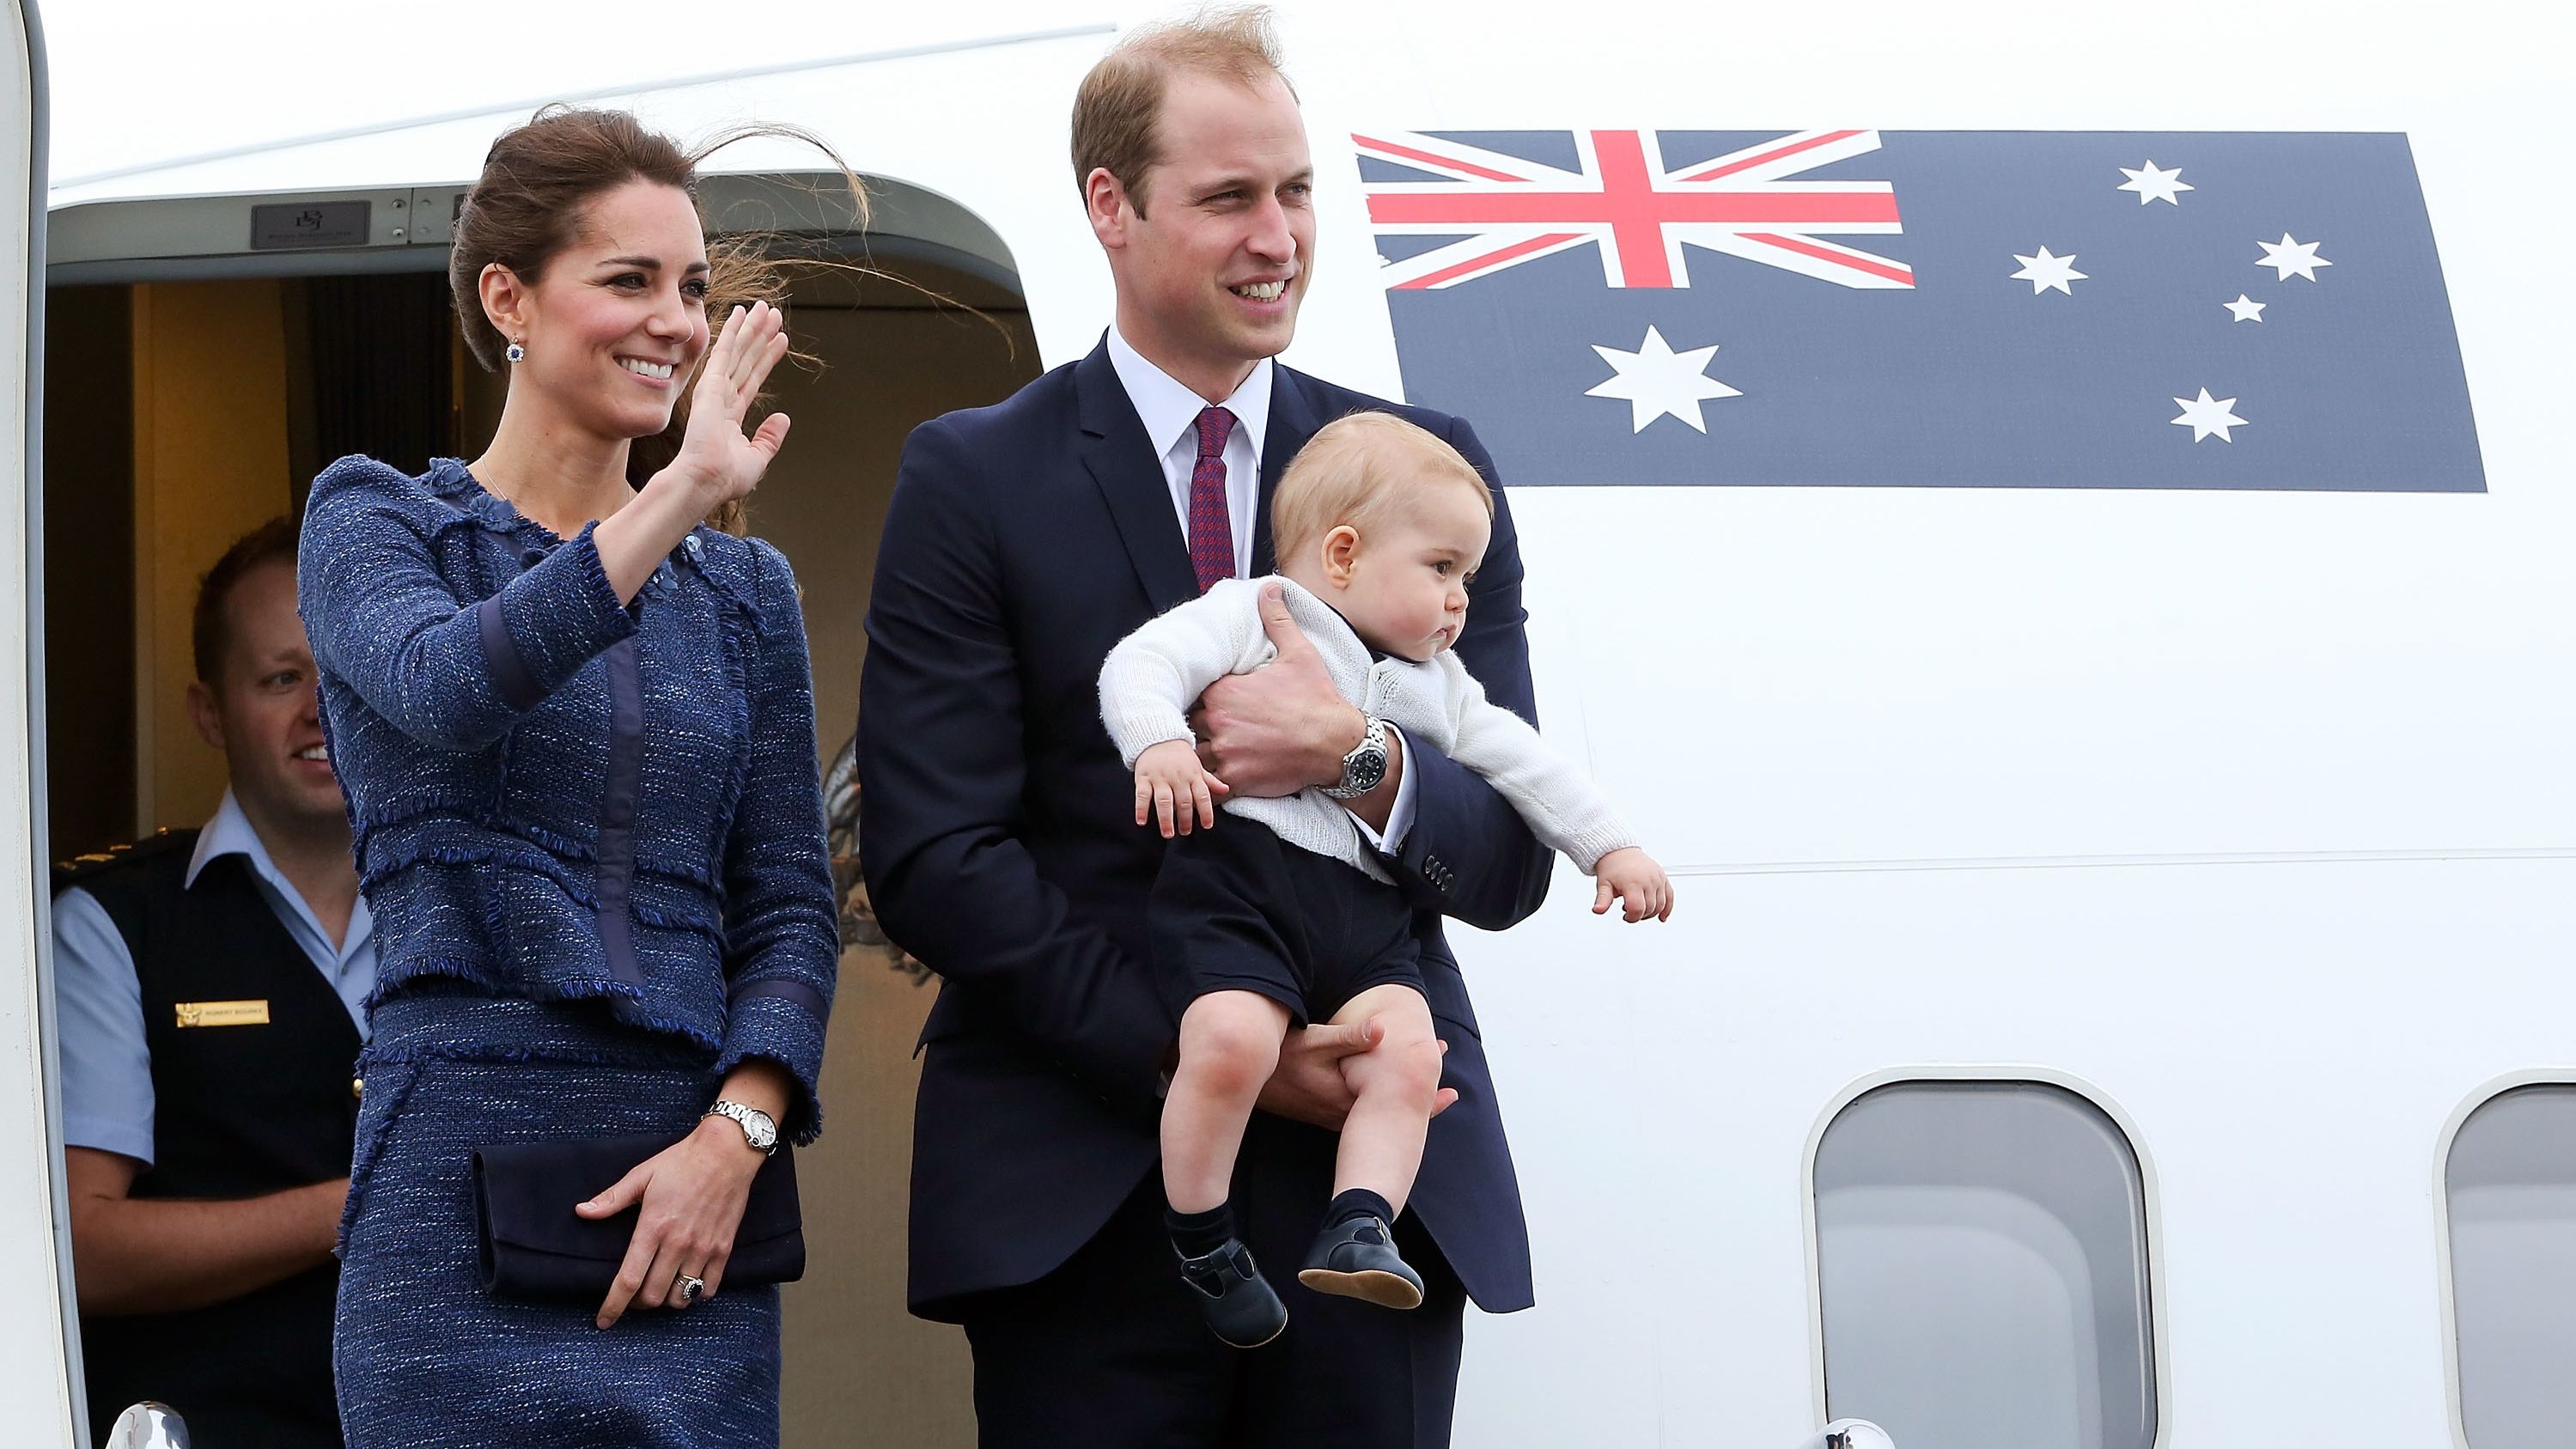 The royal family waves to a crowd before boarding a plane in Wellington, New Zealand, in April 2014. They went on a three-week tour of Australia and New Zealand.